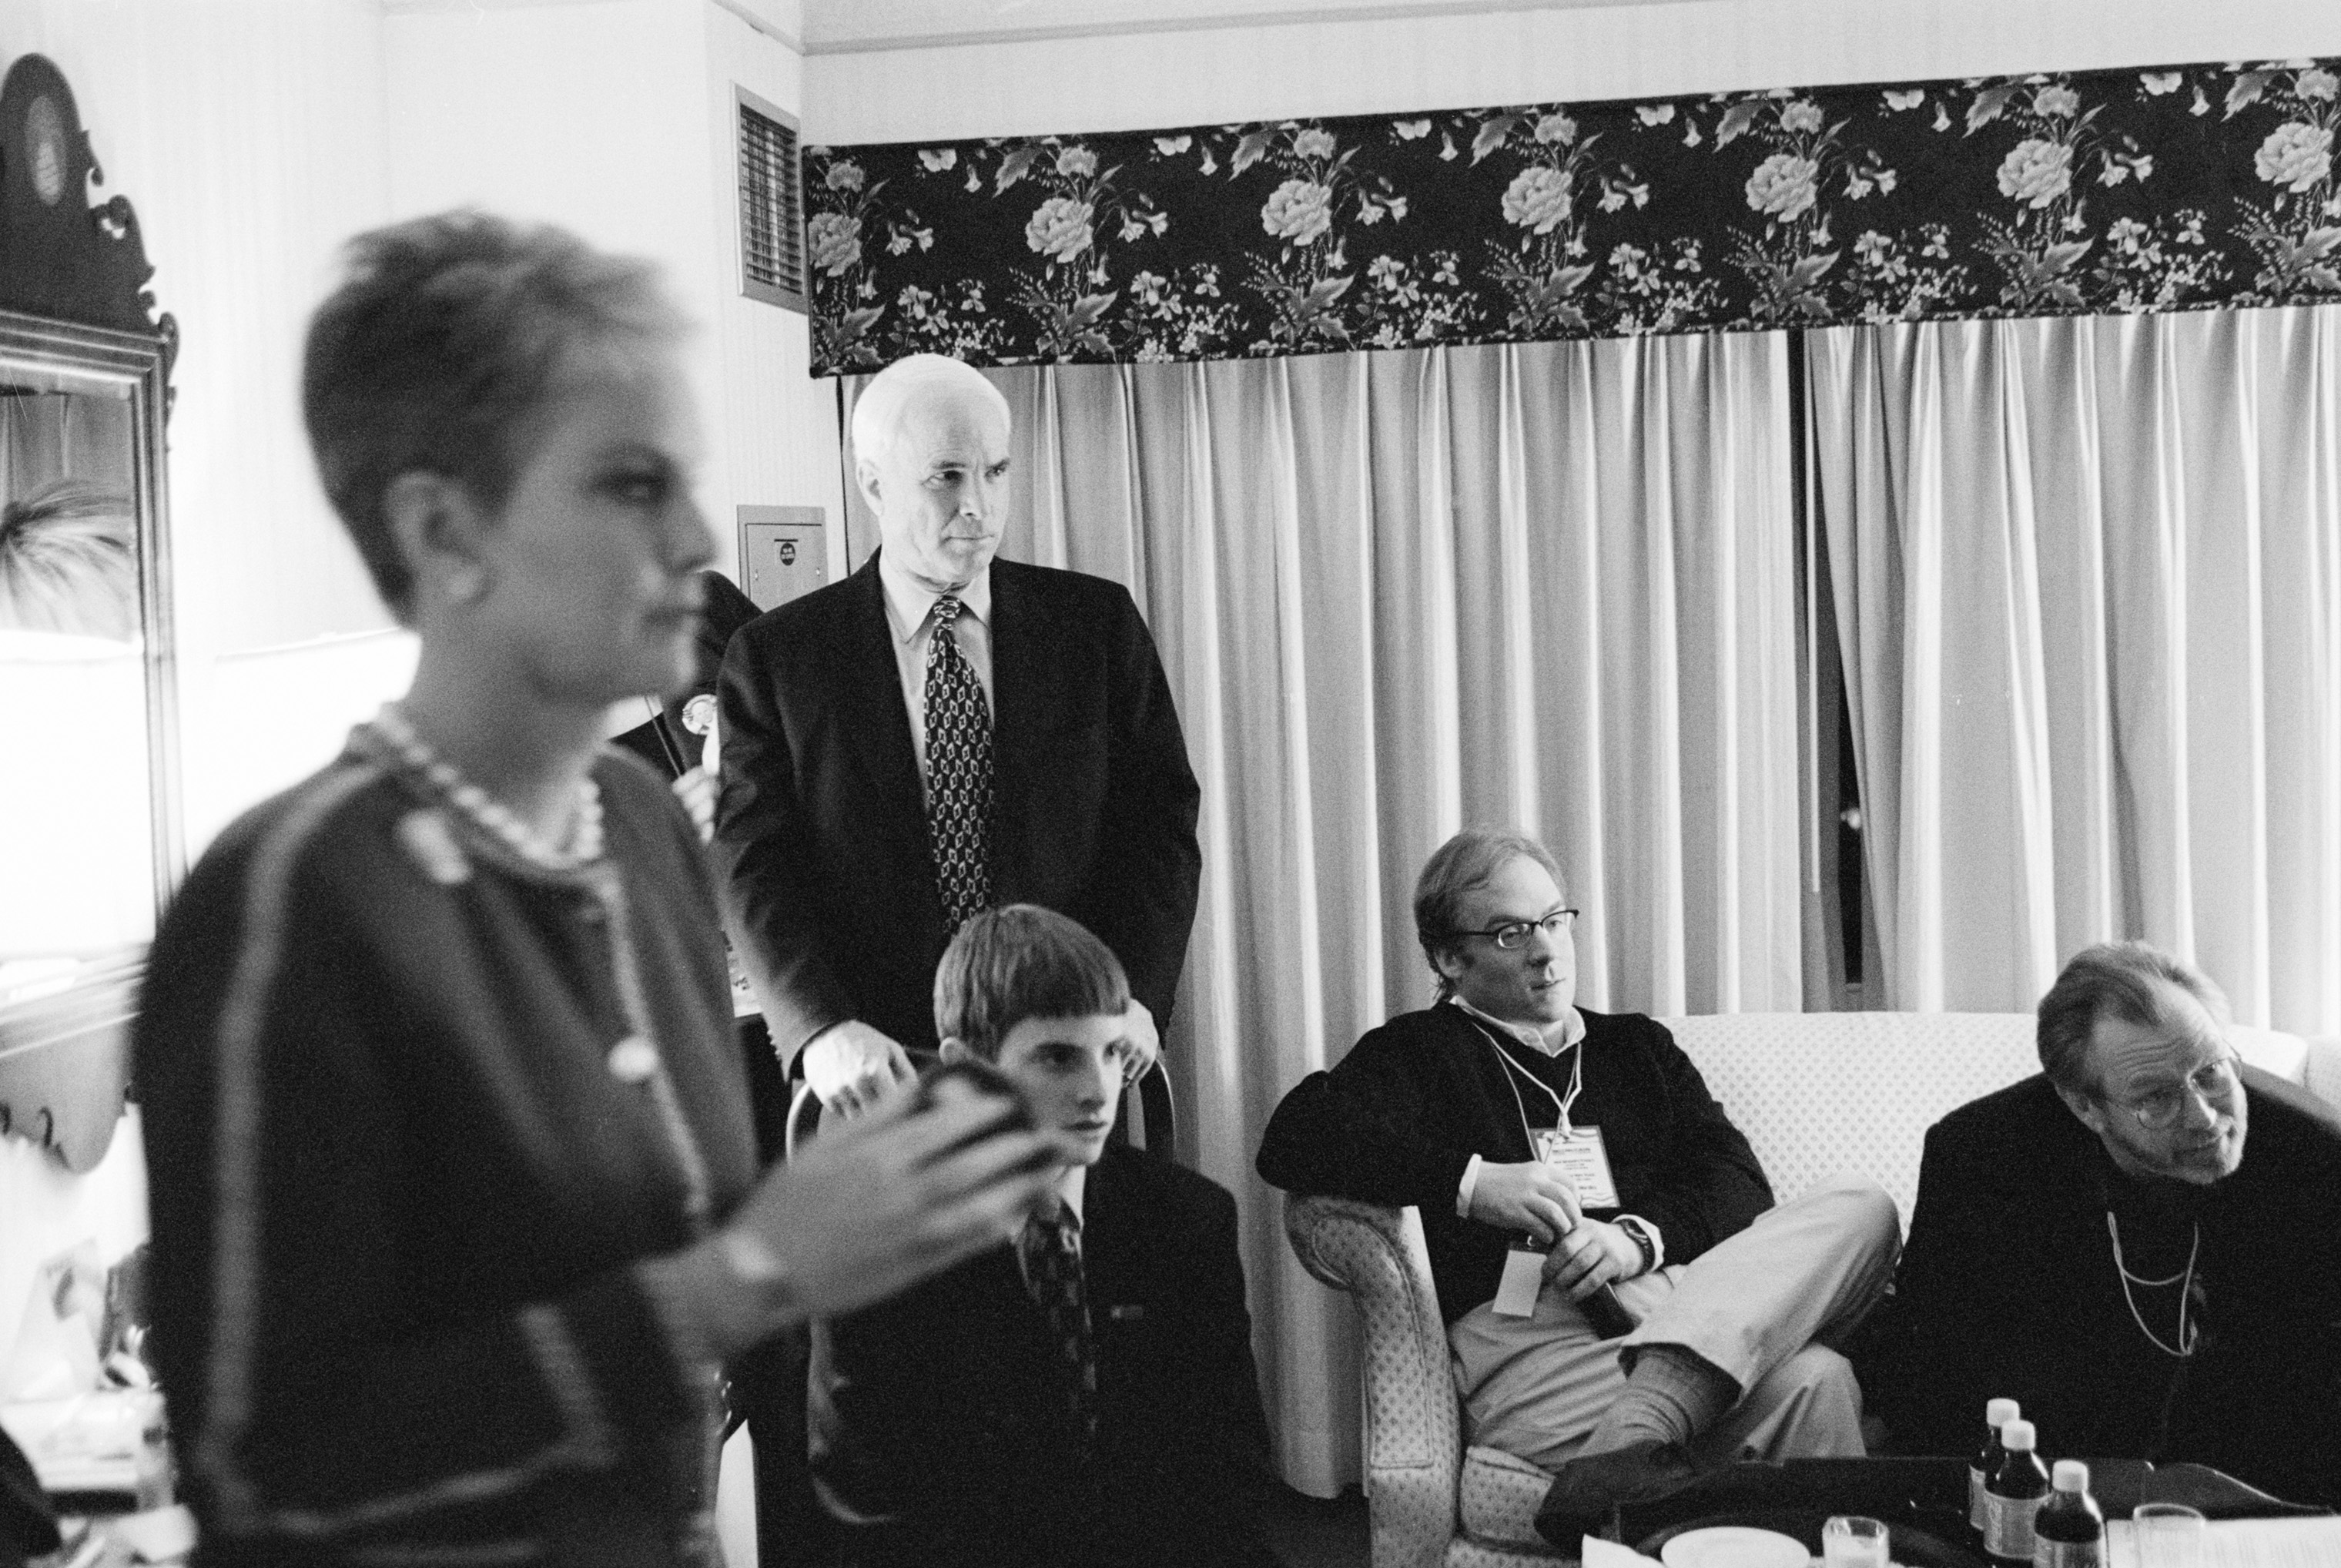 Presidential candidate John McCain with his family and members of his campaign team watching the progress of the state primary in N.H. on Feb. 1, 2000. (David Hume Kennerly—Getty Images)